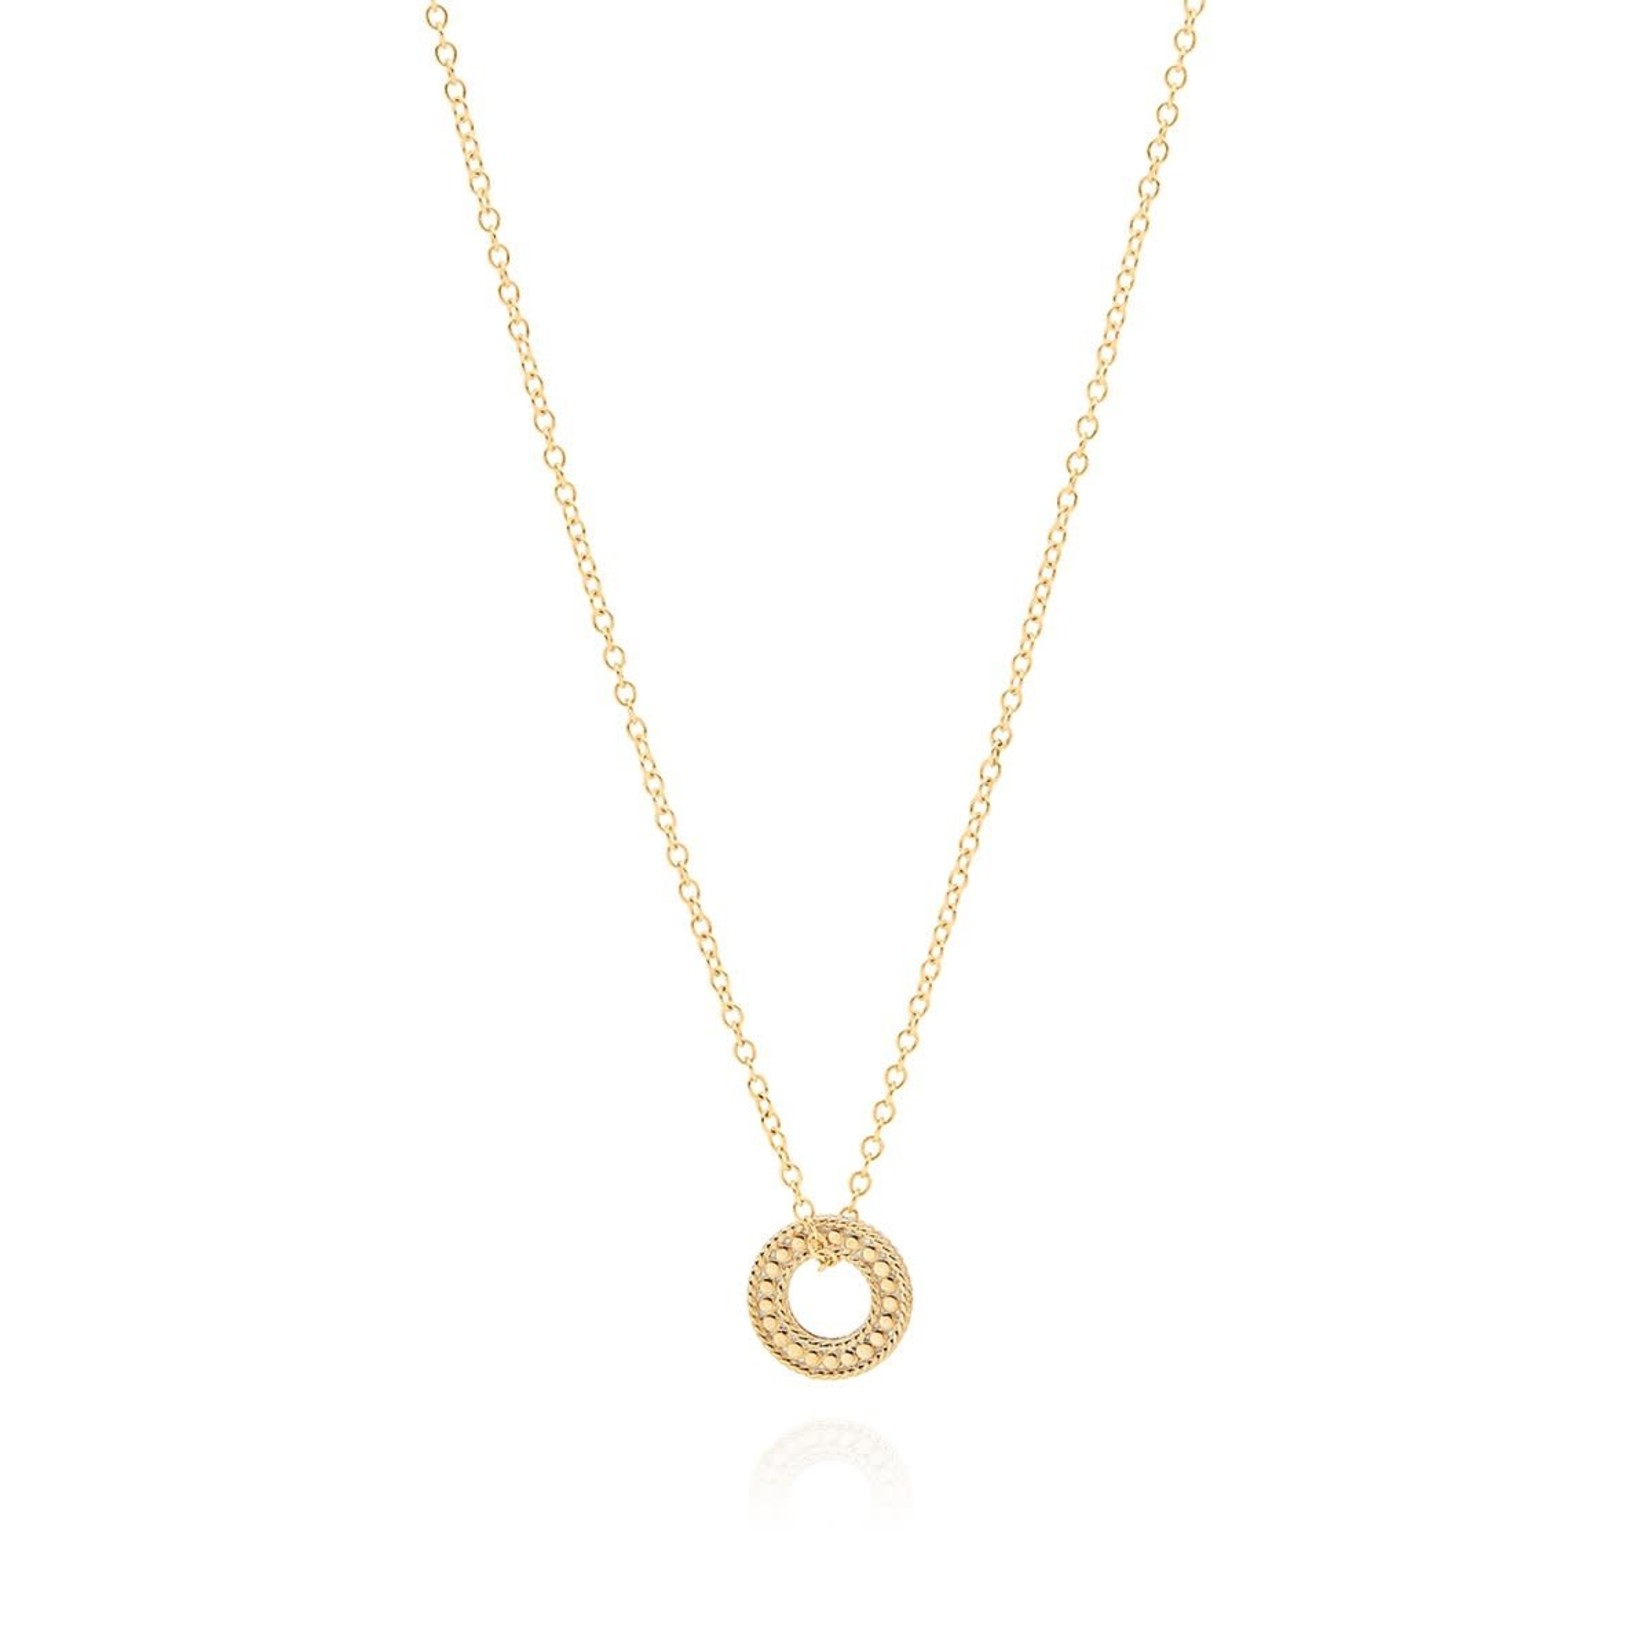 18KY Gold & Sterling Silver Circle of Life Necklace